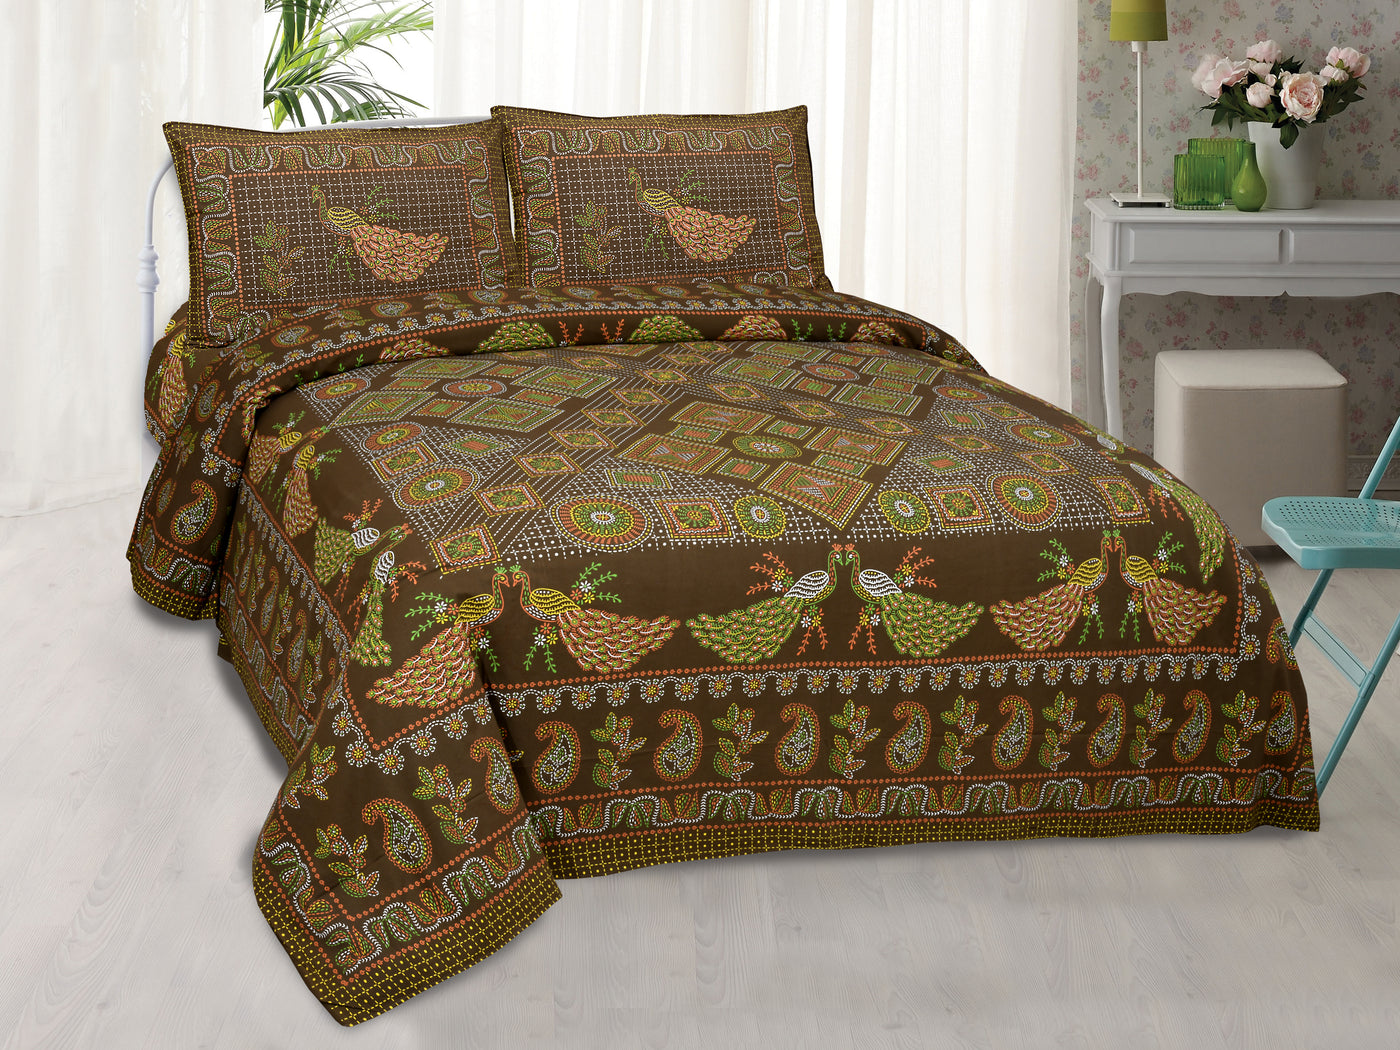 Pure Cotton Brown Color King Size Bedsheet For Double Bed By Braise